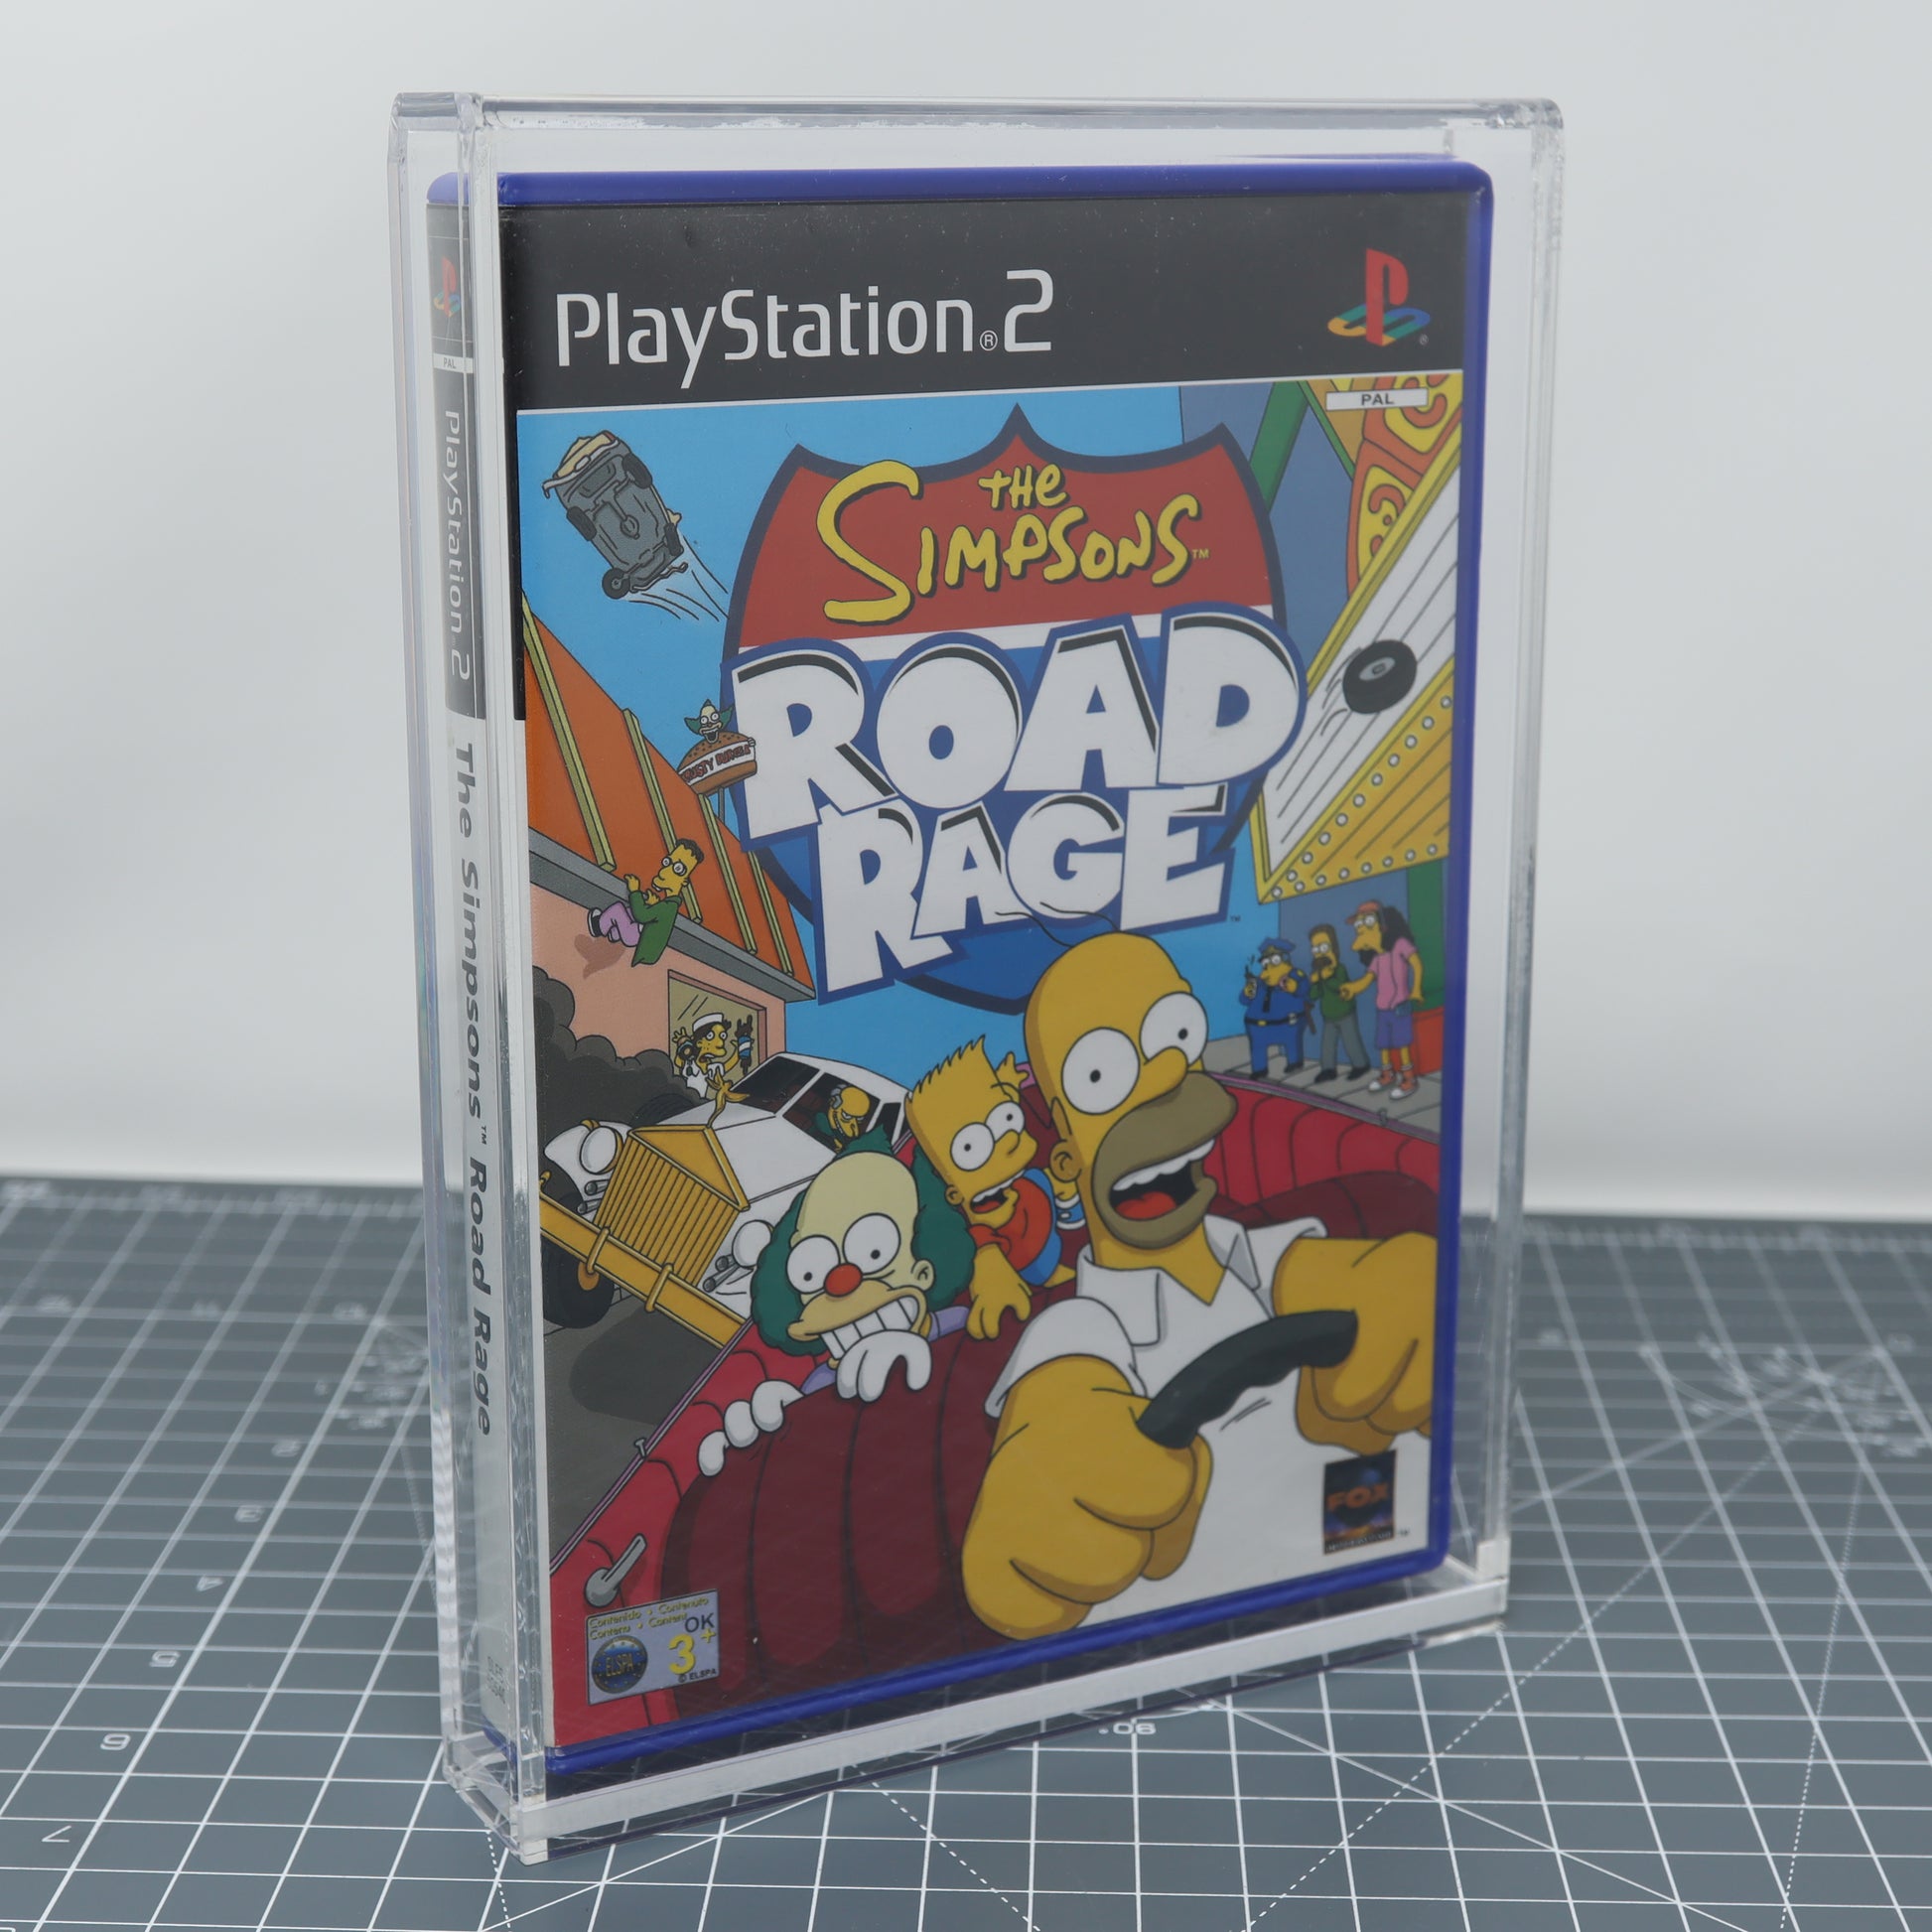 Lab Fifteen Co custom acrylic display capsule for Sony Playstation 2 game case simpsons road rage front cover